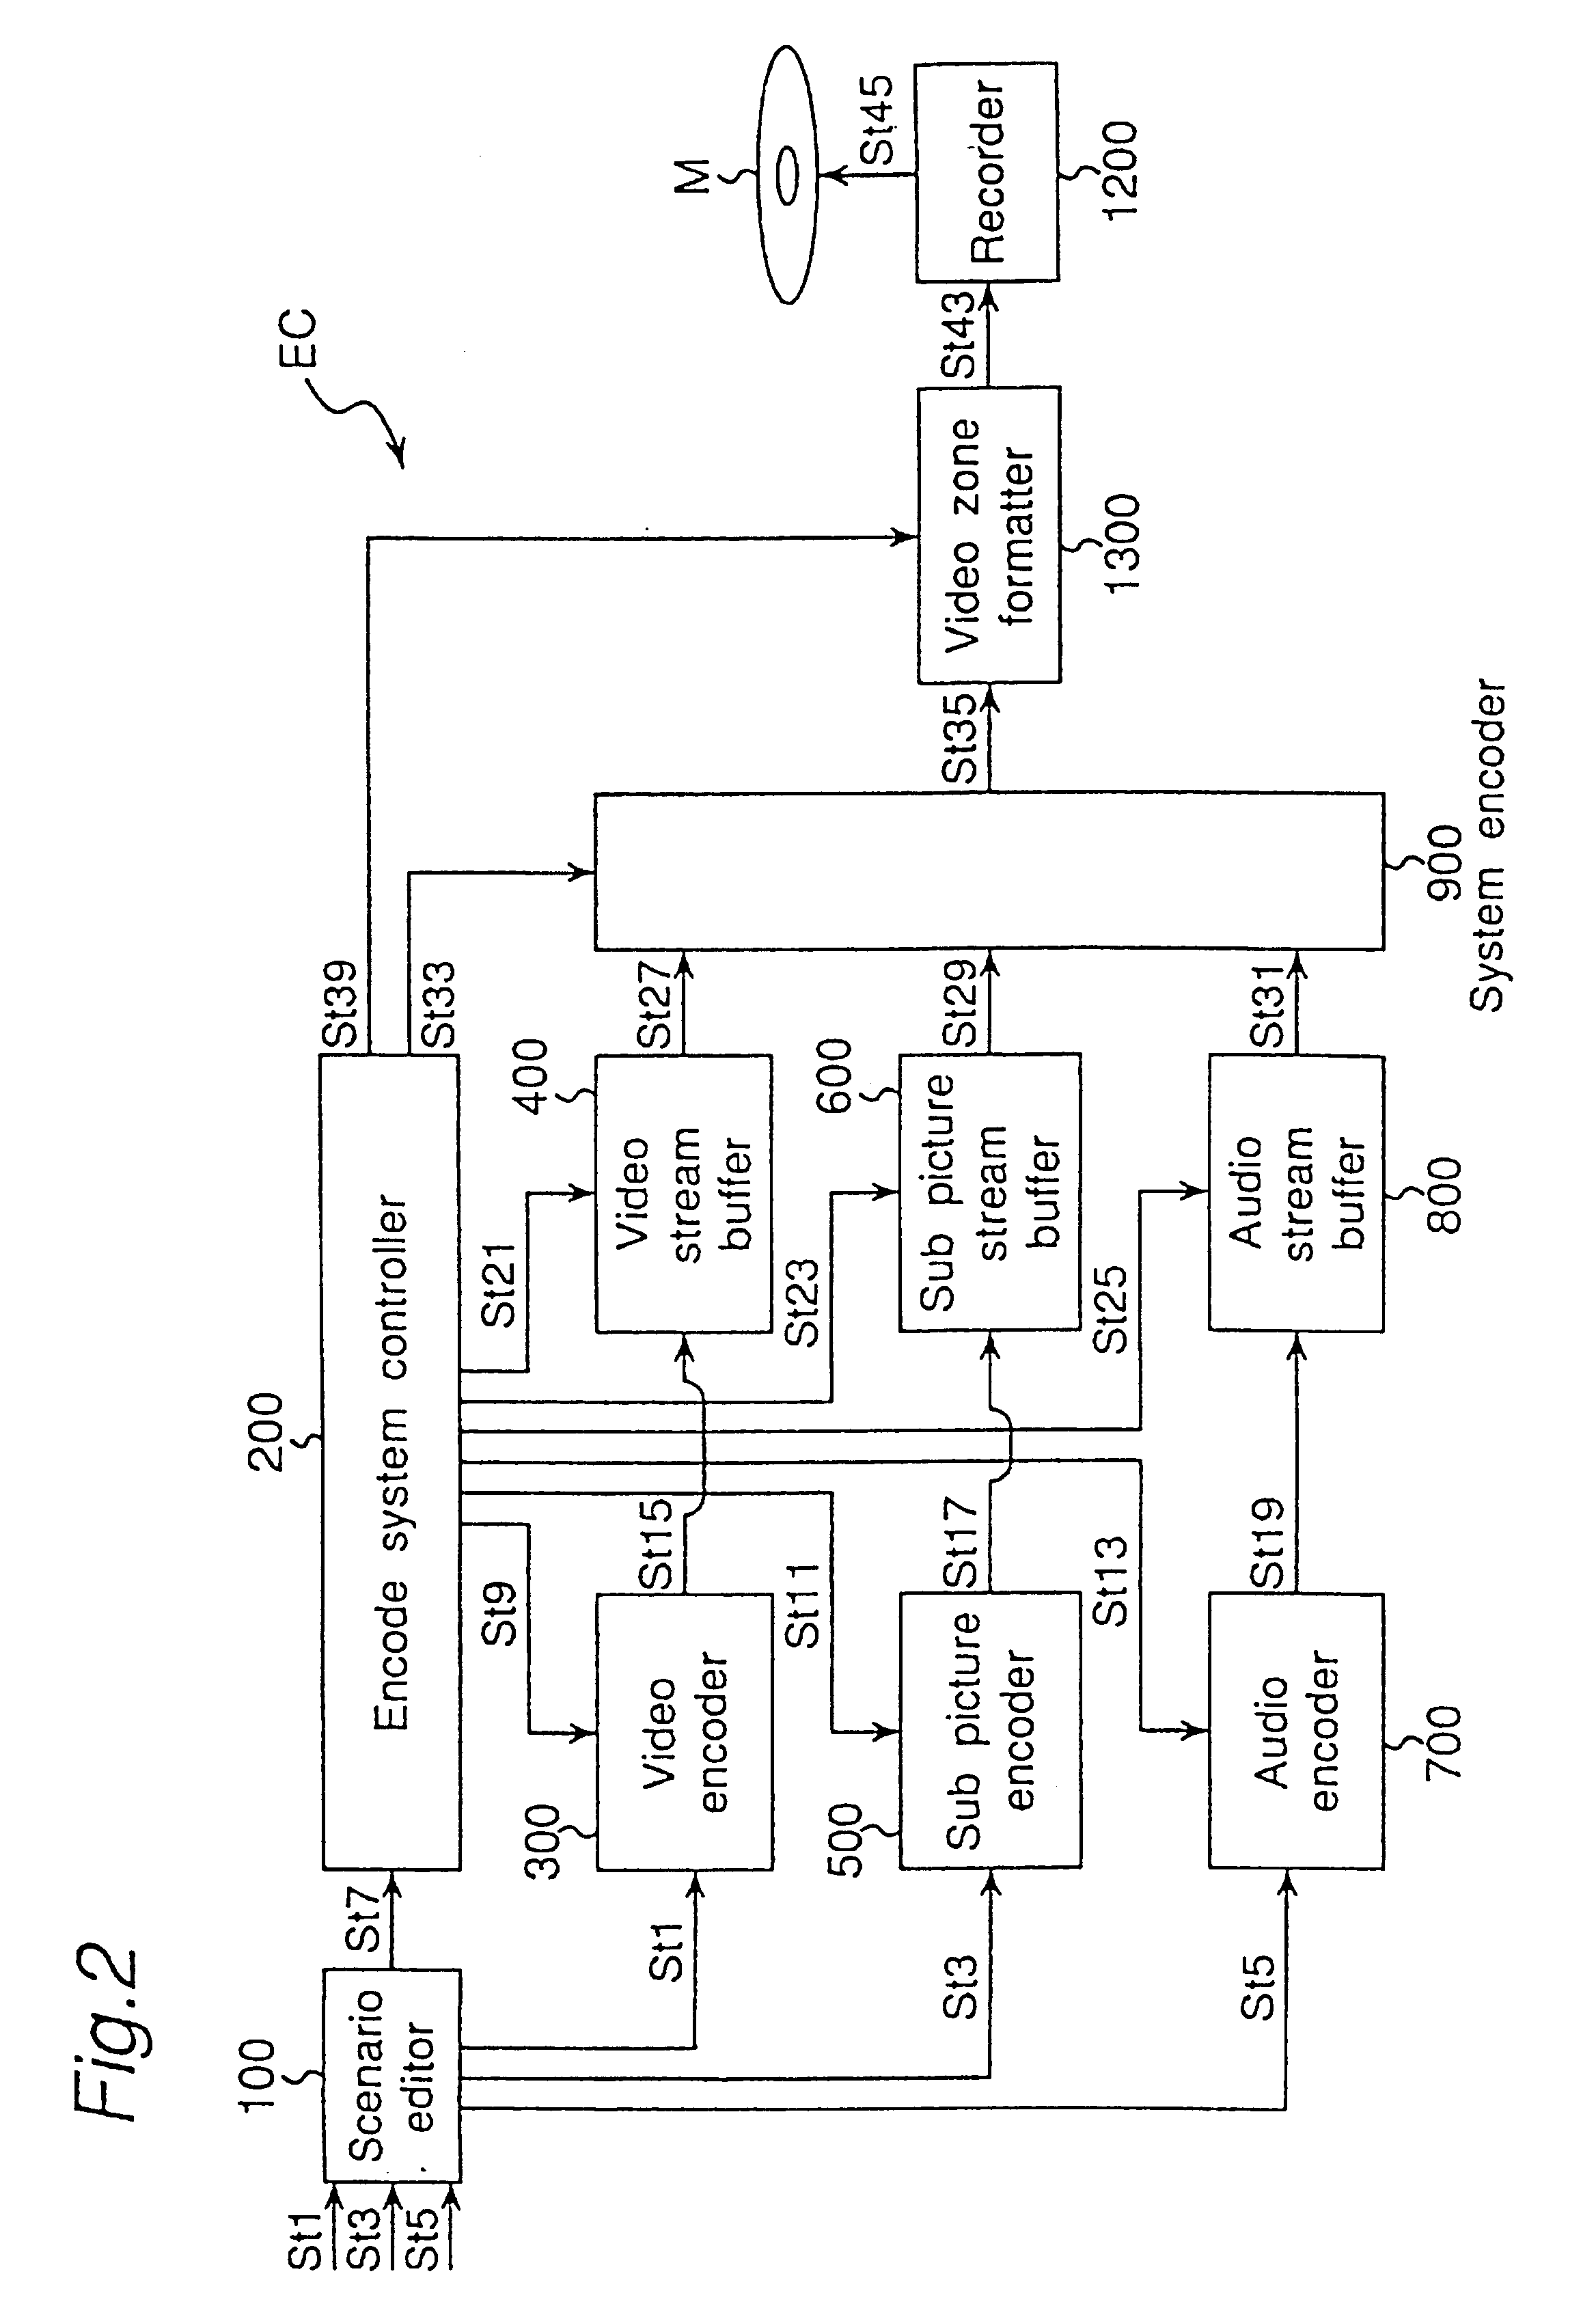 Method and an apparatus for system encoding bitstreams for seamless connection